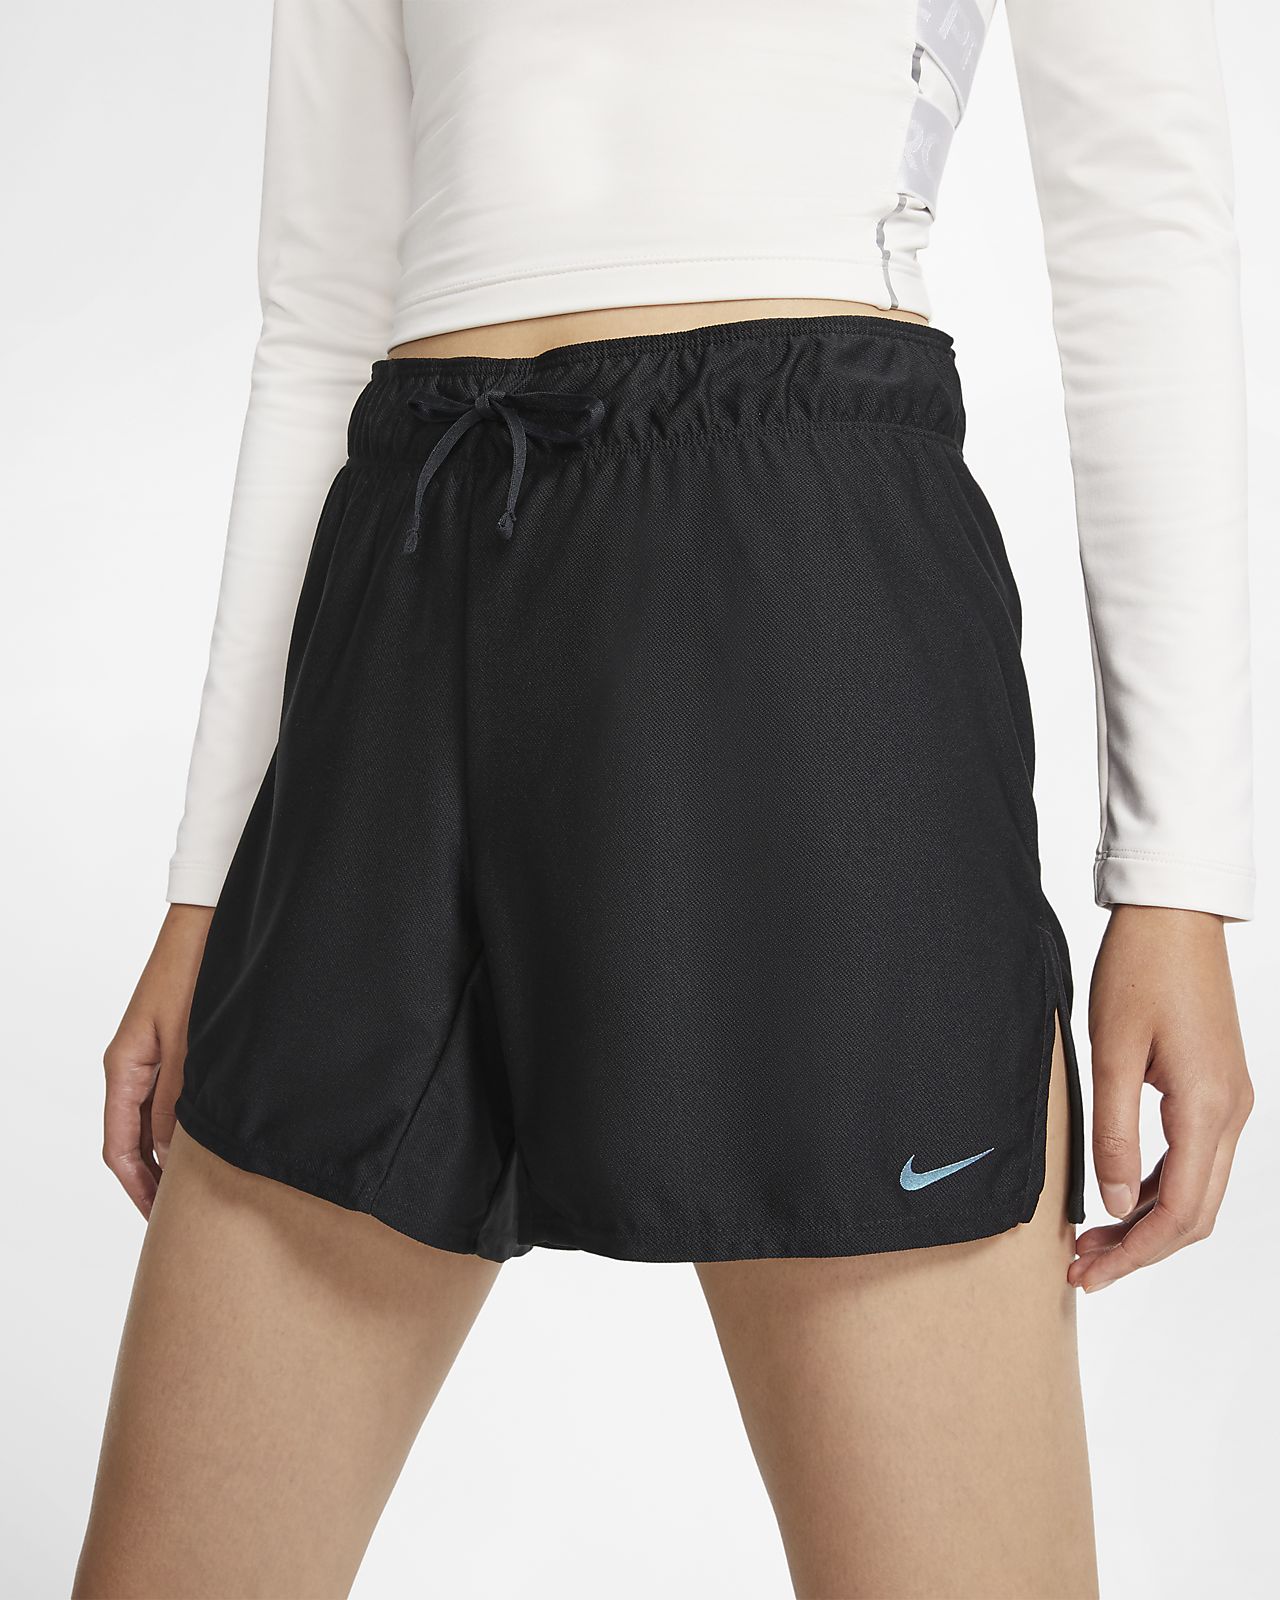 dri fit shorts women's packet tracer